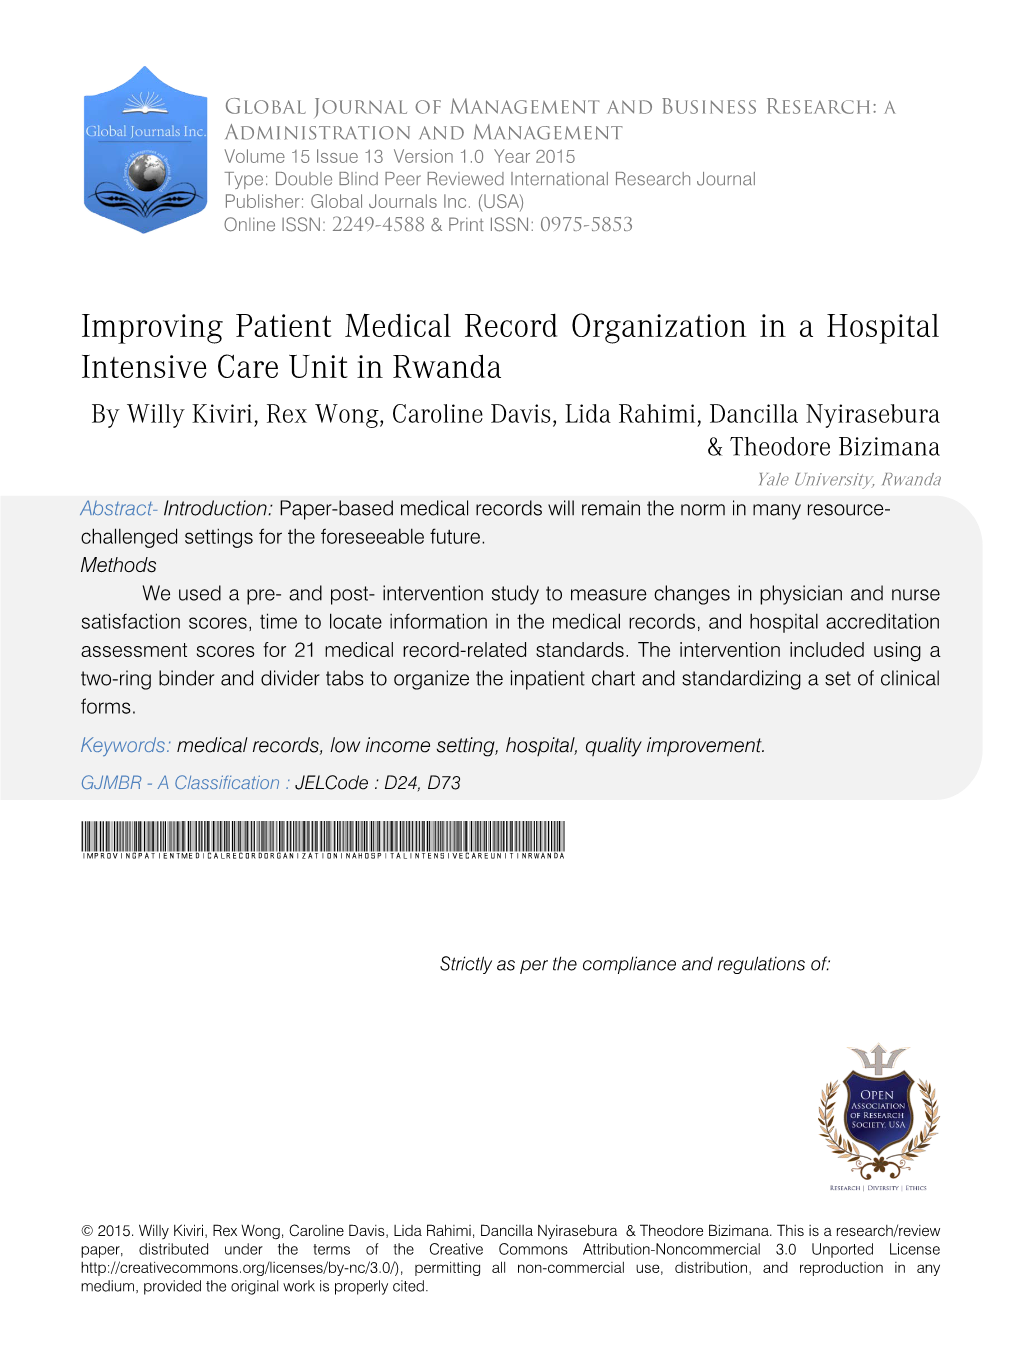 Improving Patient Medical Record Organization in a Hospital Intensive